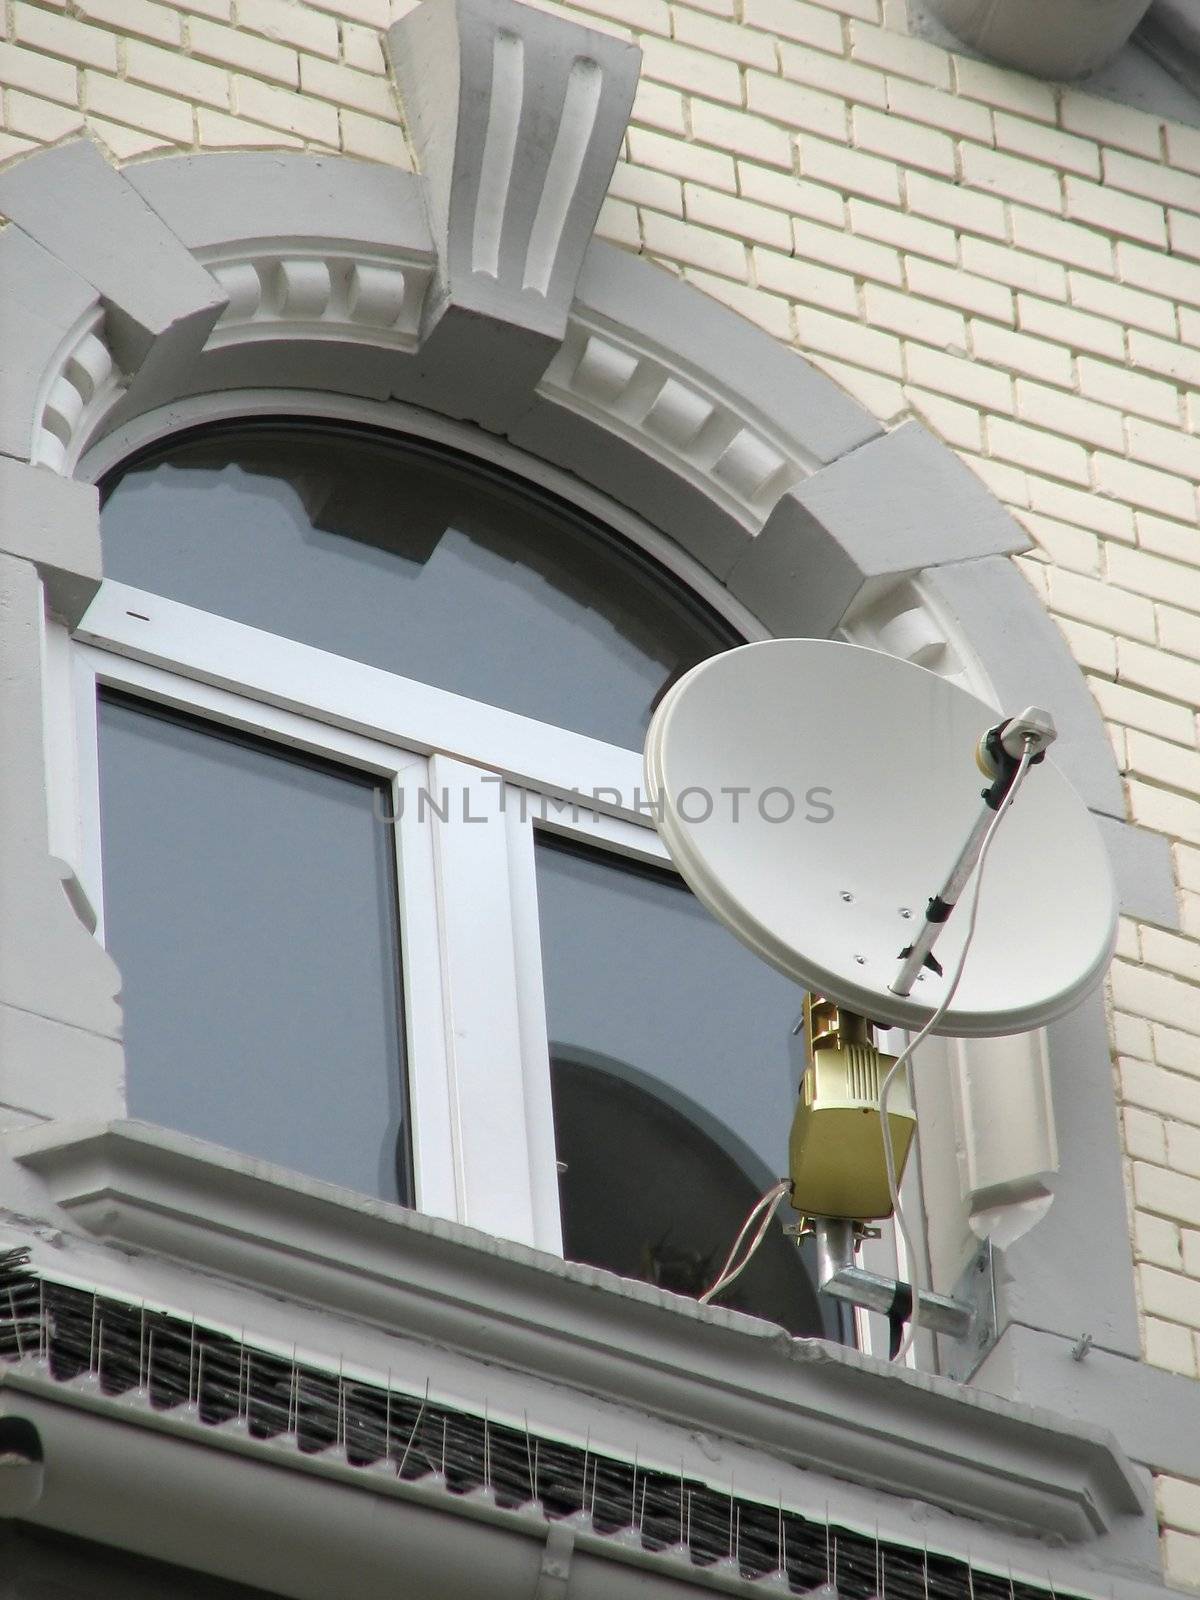 modern communication device on an old building